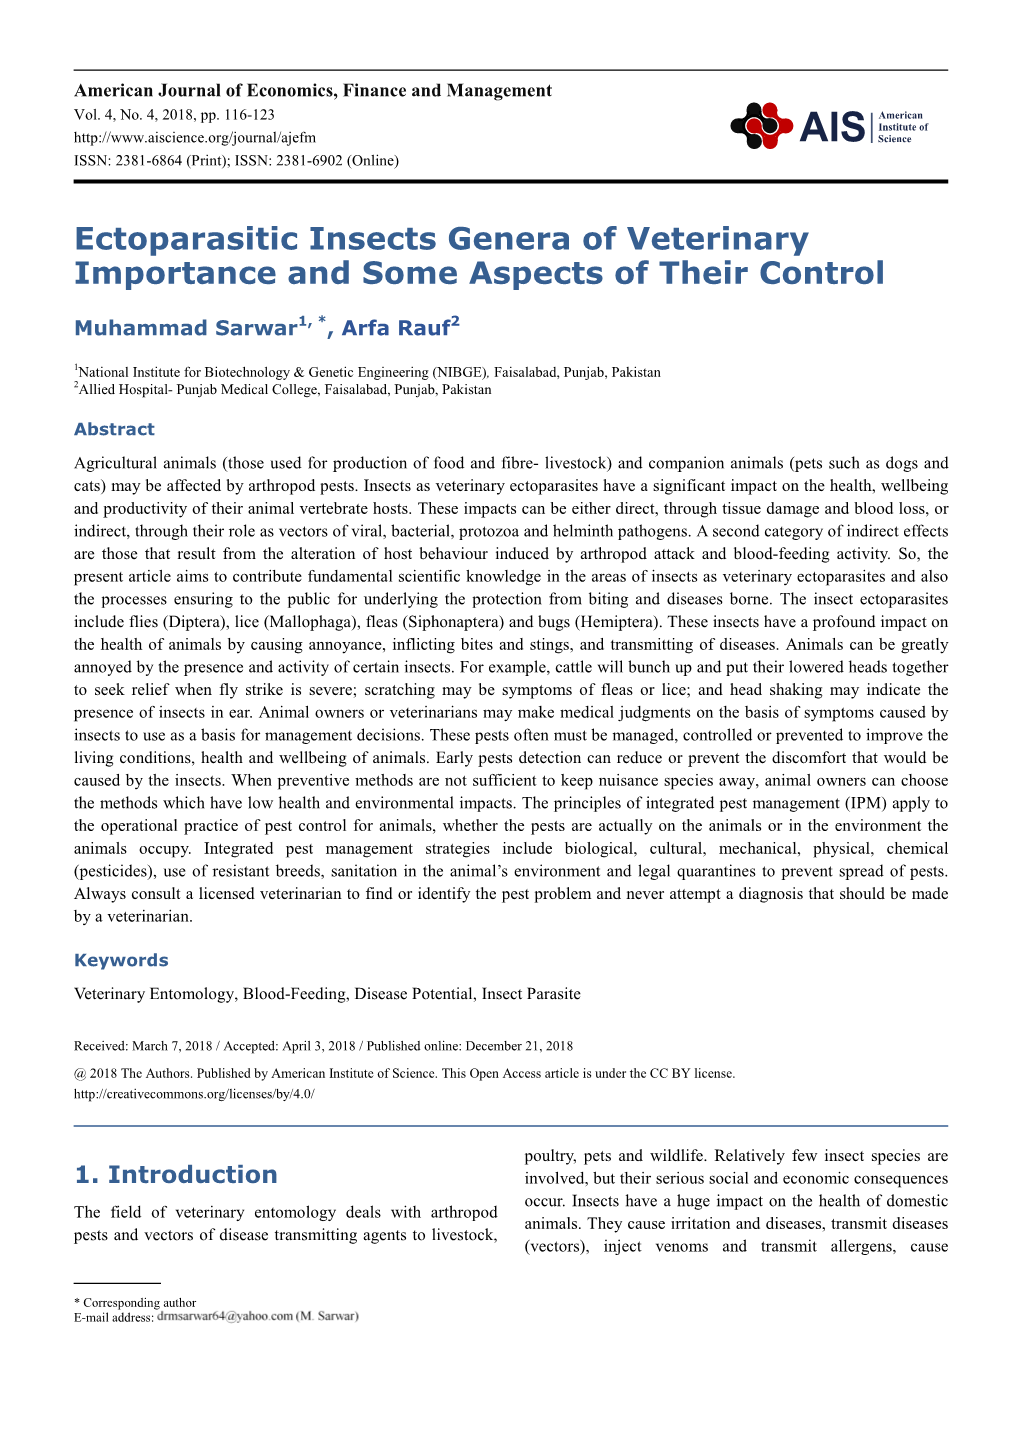 Ectoparasitic Insects Genera of Veterinary Importance and Some Aspects of Their Control